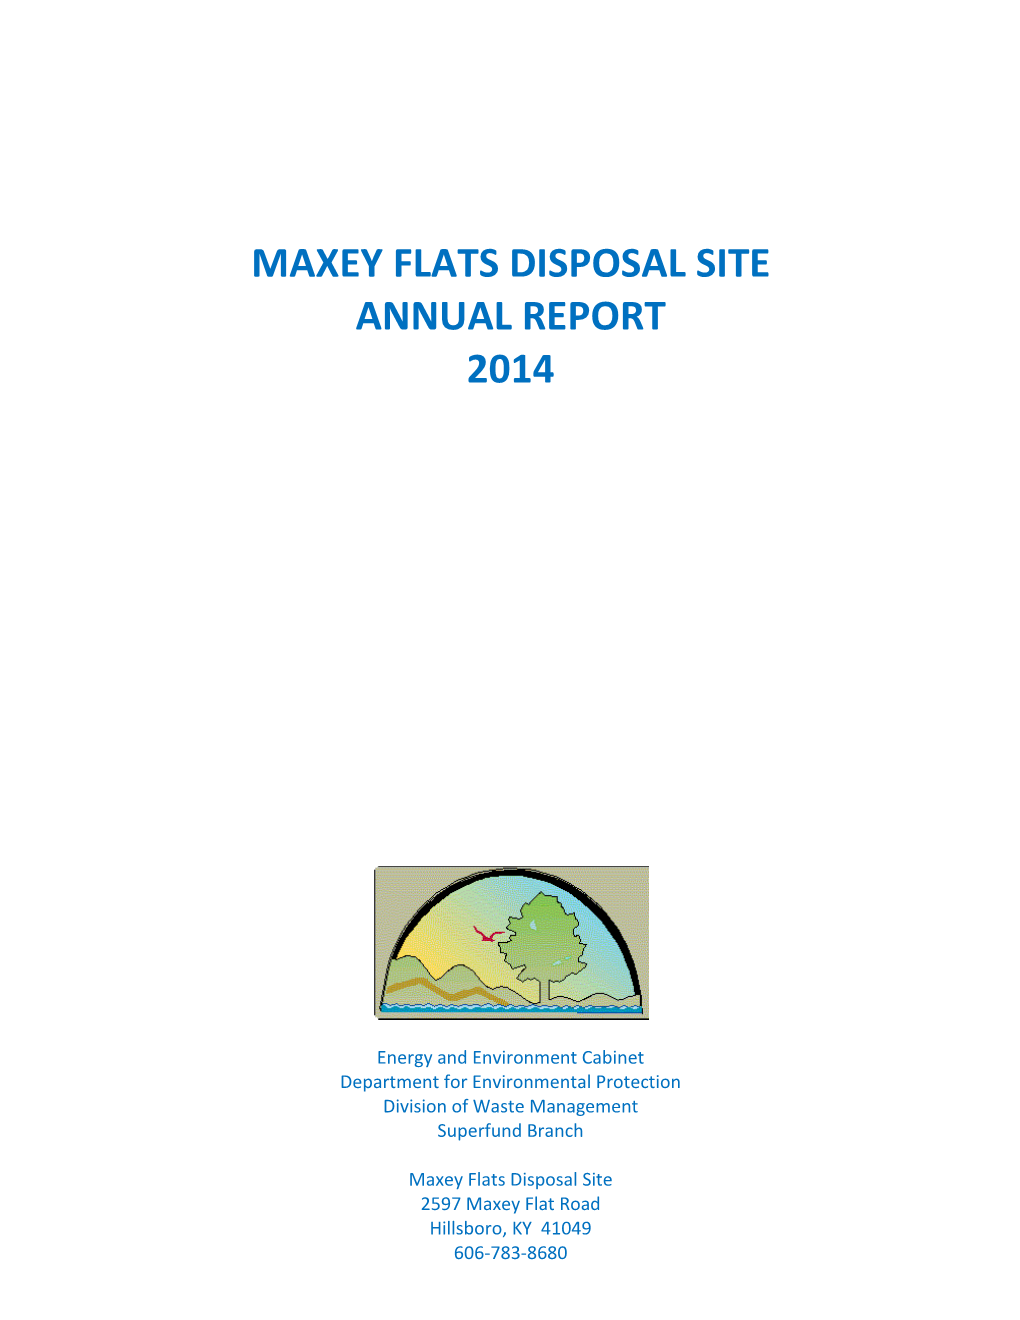 Maxey Flats Disposal Site Annual Report 2014